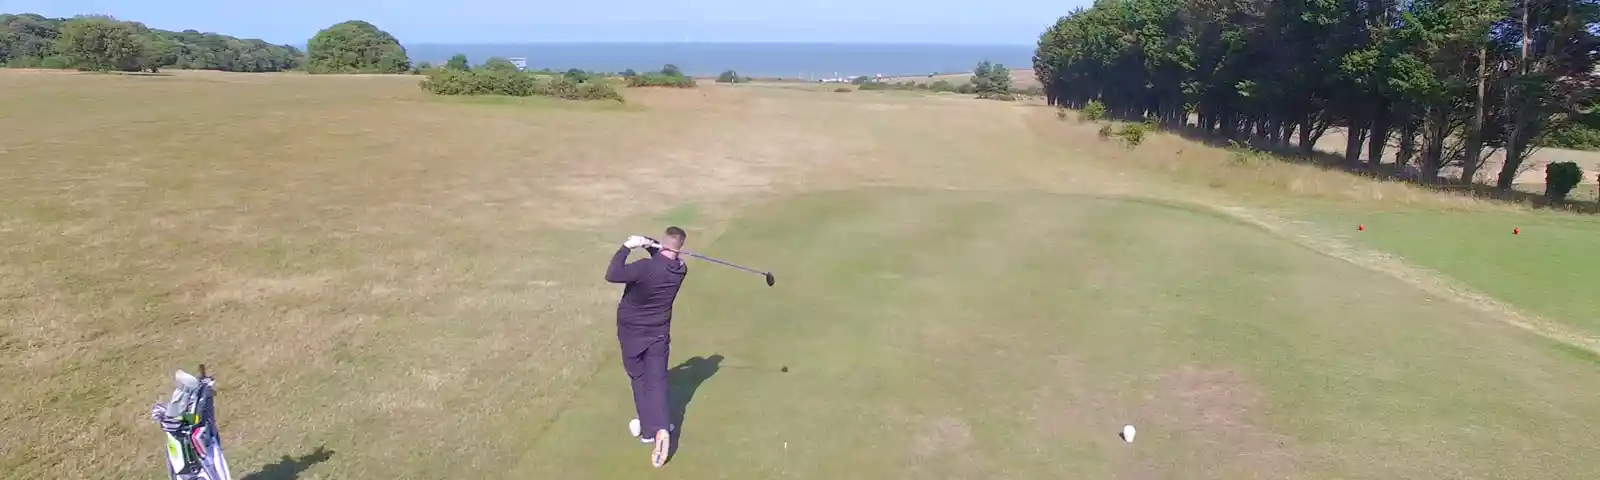 Man Playing Golf At North Foreland Golf Course Credit Tourism At Thanet District Council